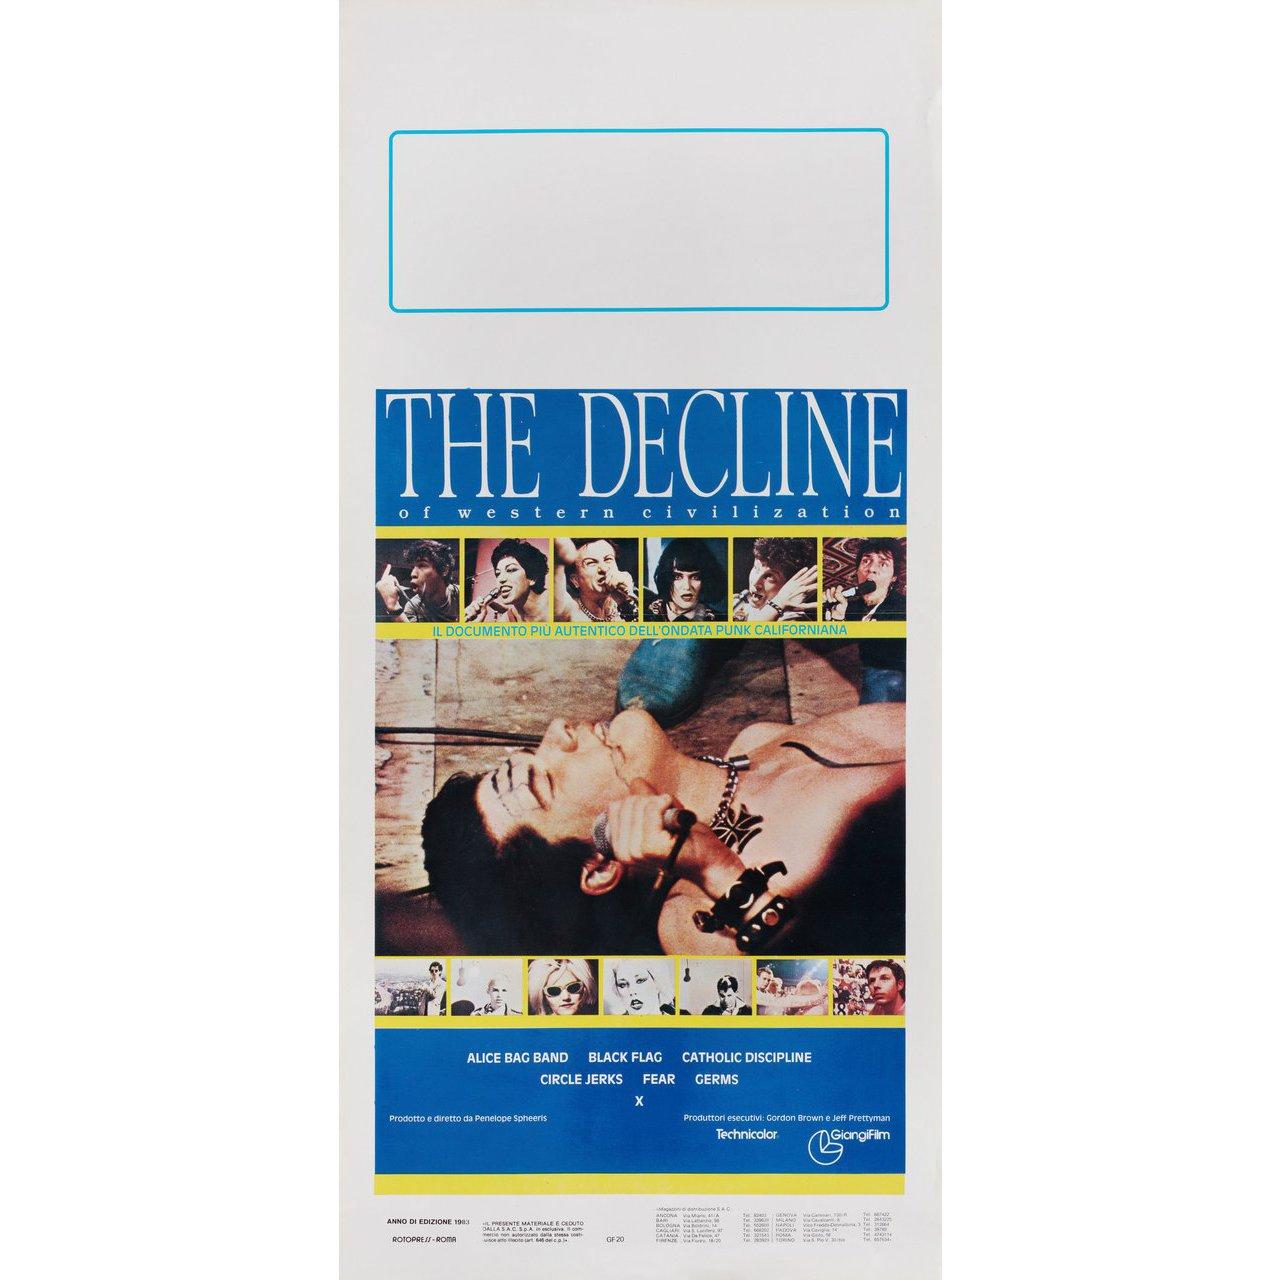 Original 1981 Italian locandina poster for the documentary film The Decline of Western Civilization directed by Penelope Spheeris with Alice Bag Band / Claude Bessey / Black Flag. Very good-fine condition, folded. Many original posters were issued